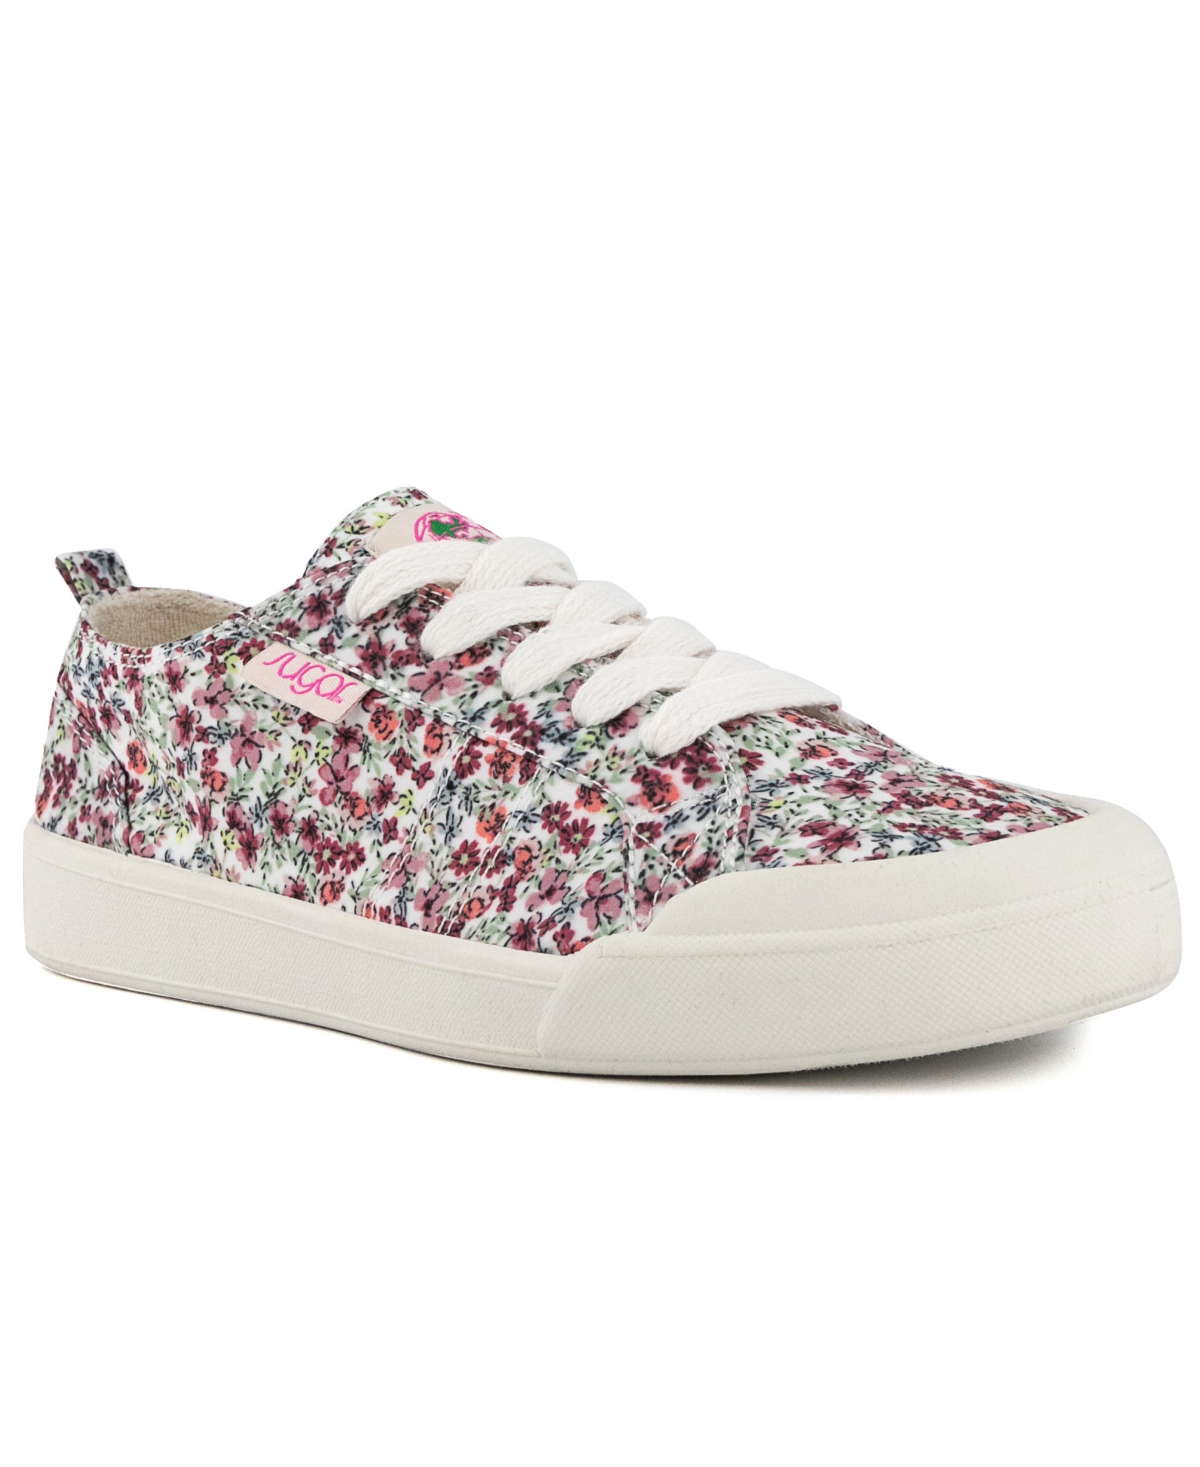 Women's Festival Lace-up Sneaker - Denim -  Recycled Cotton